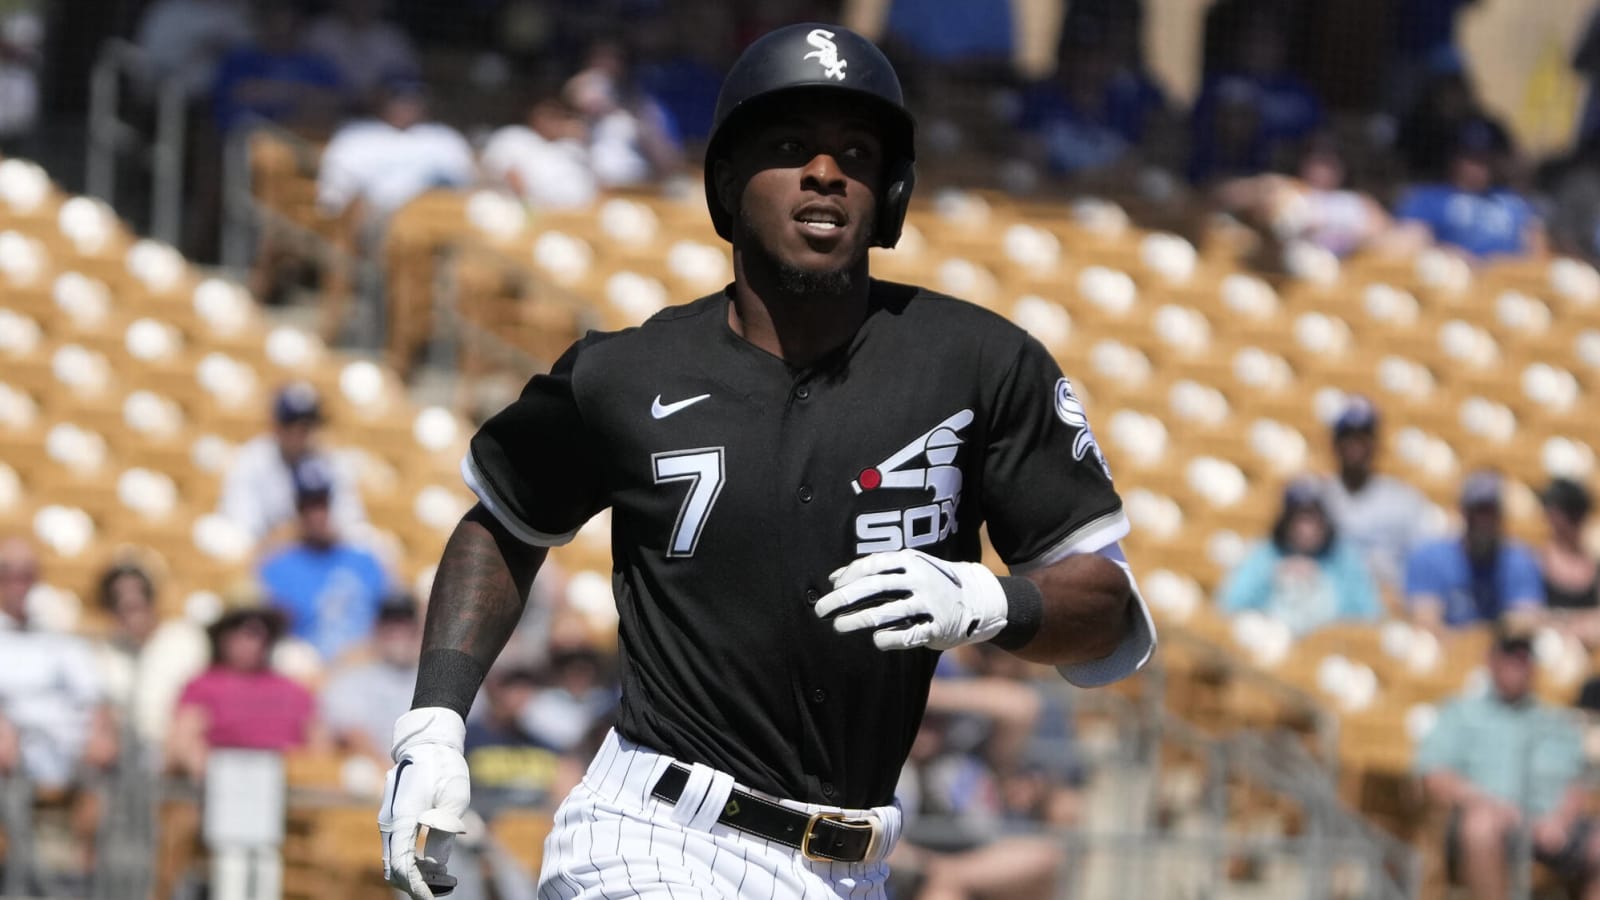 Tim Anderson's suspension reduced to two games